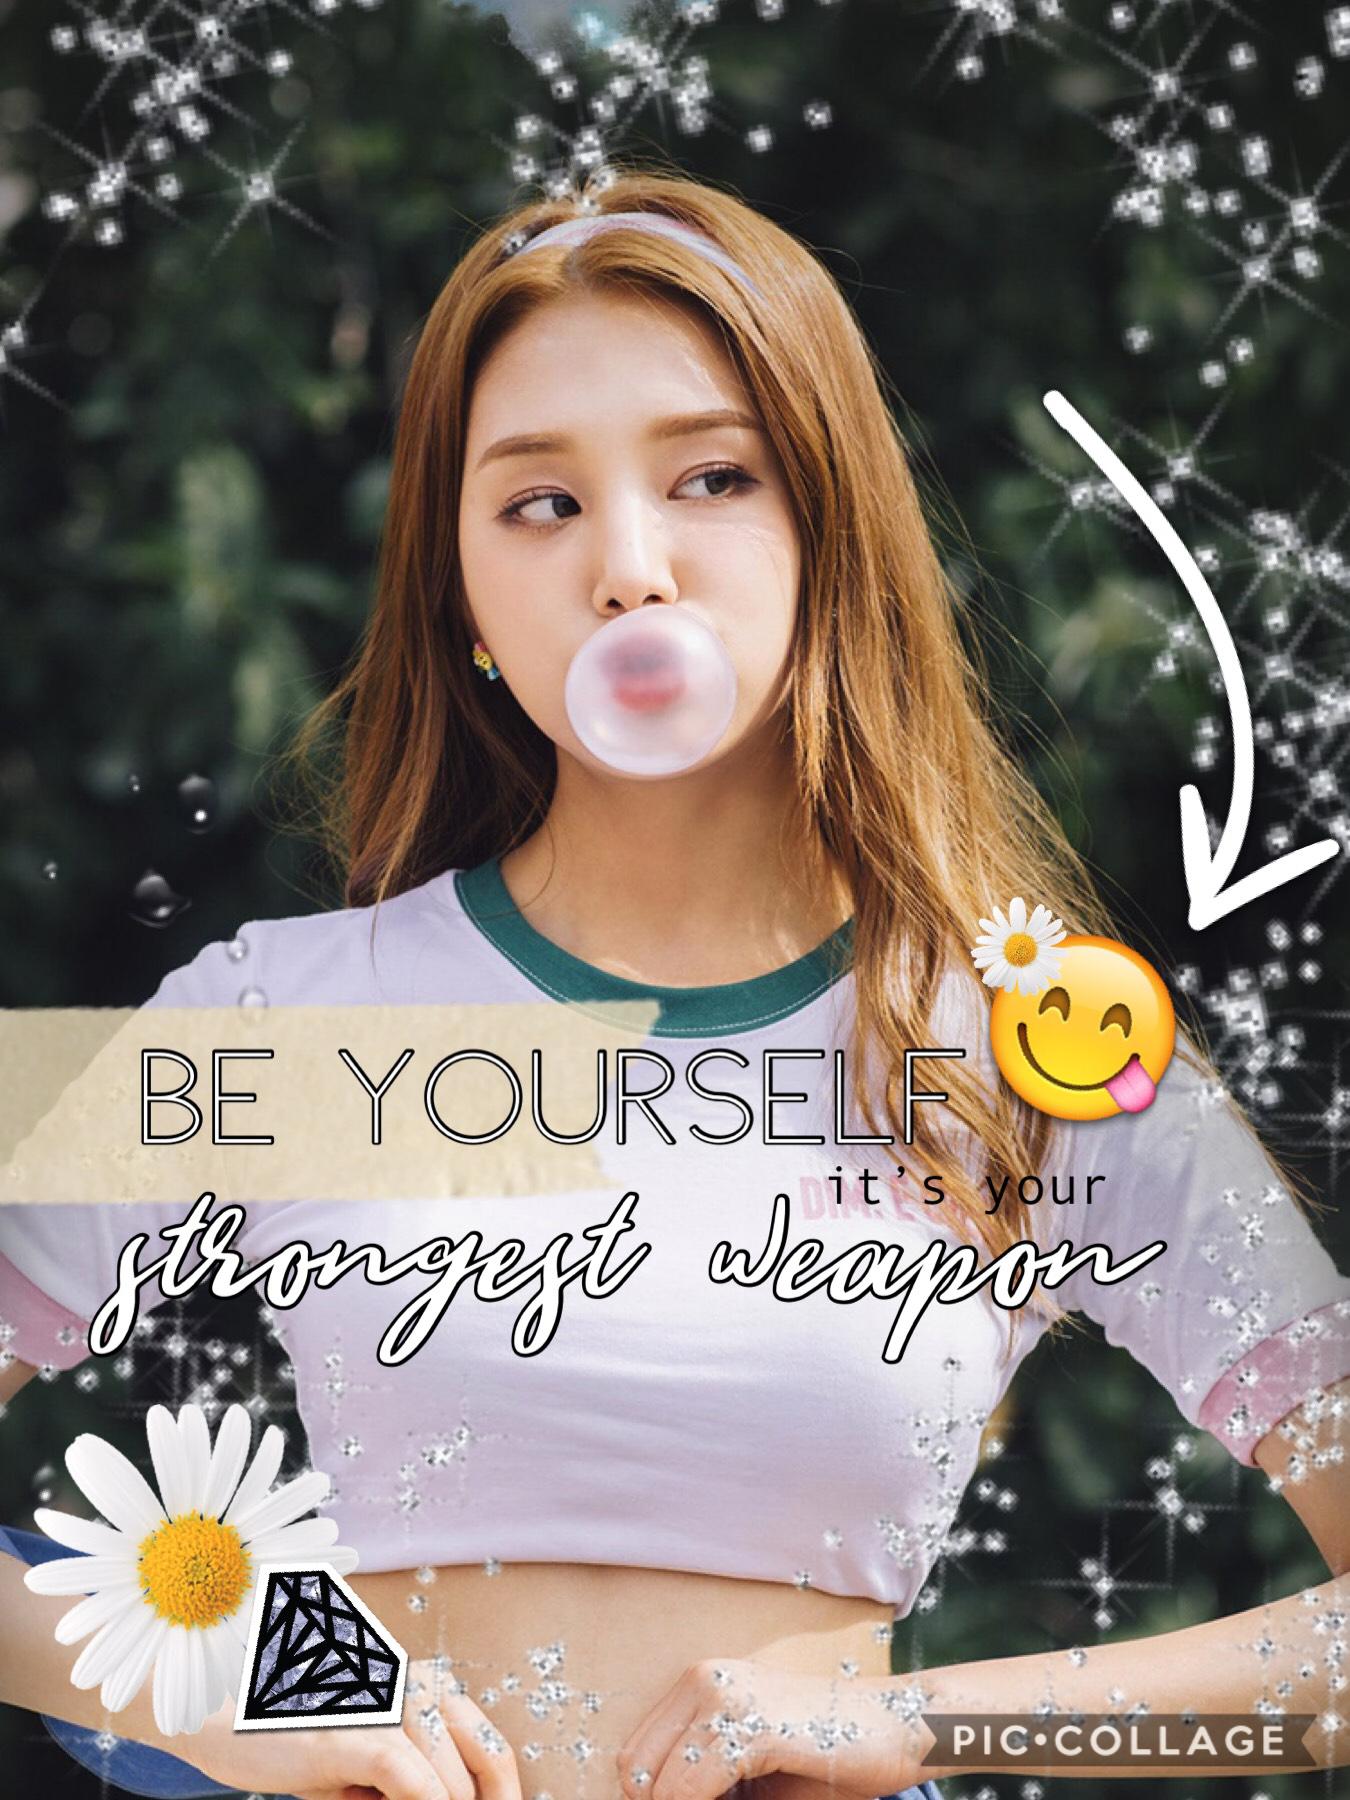 🌸 tap 🌸
Be yourself 